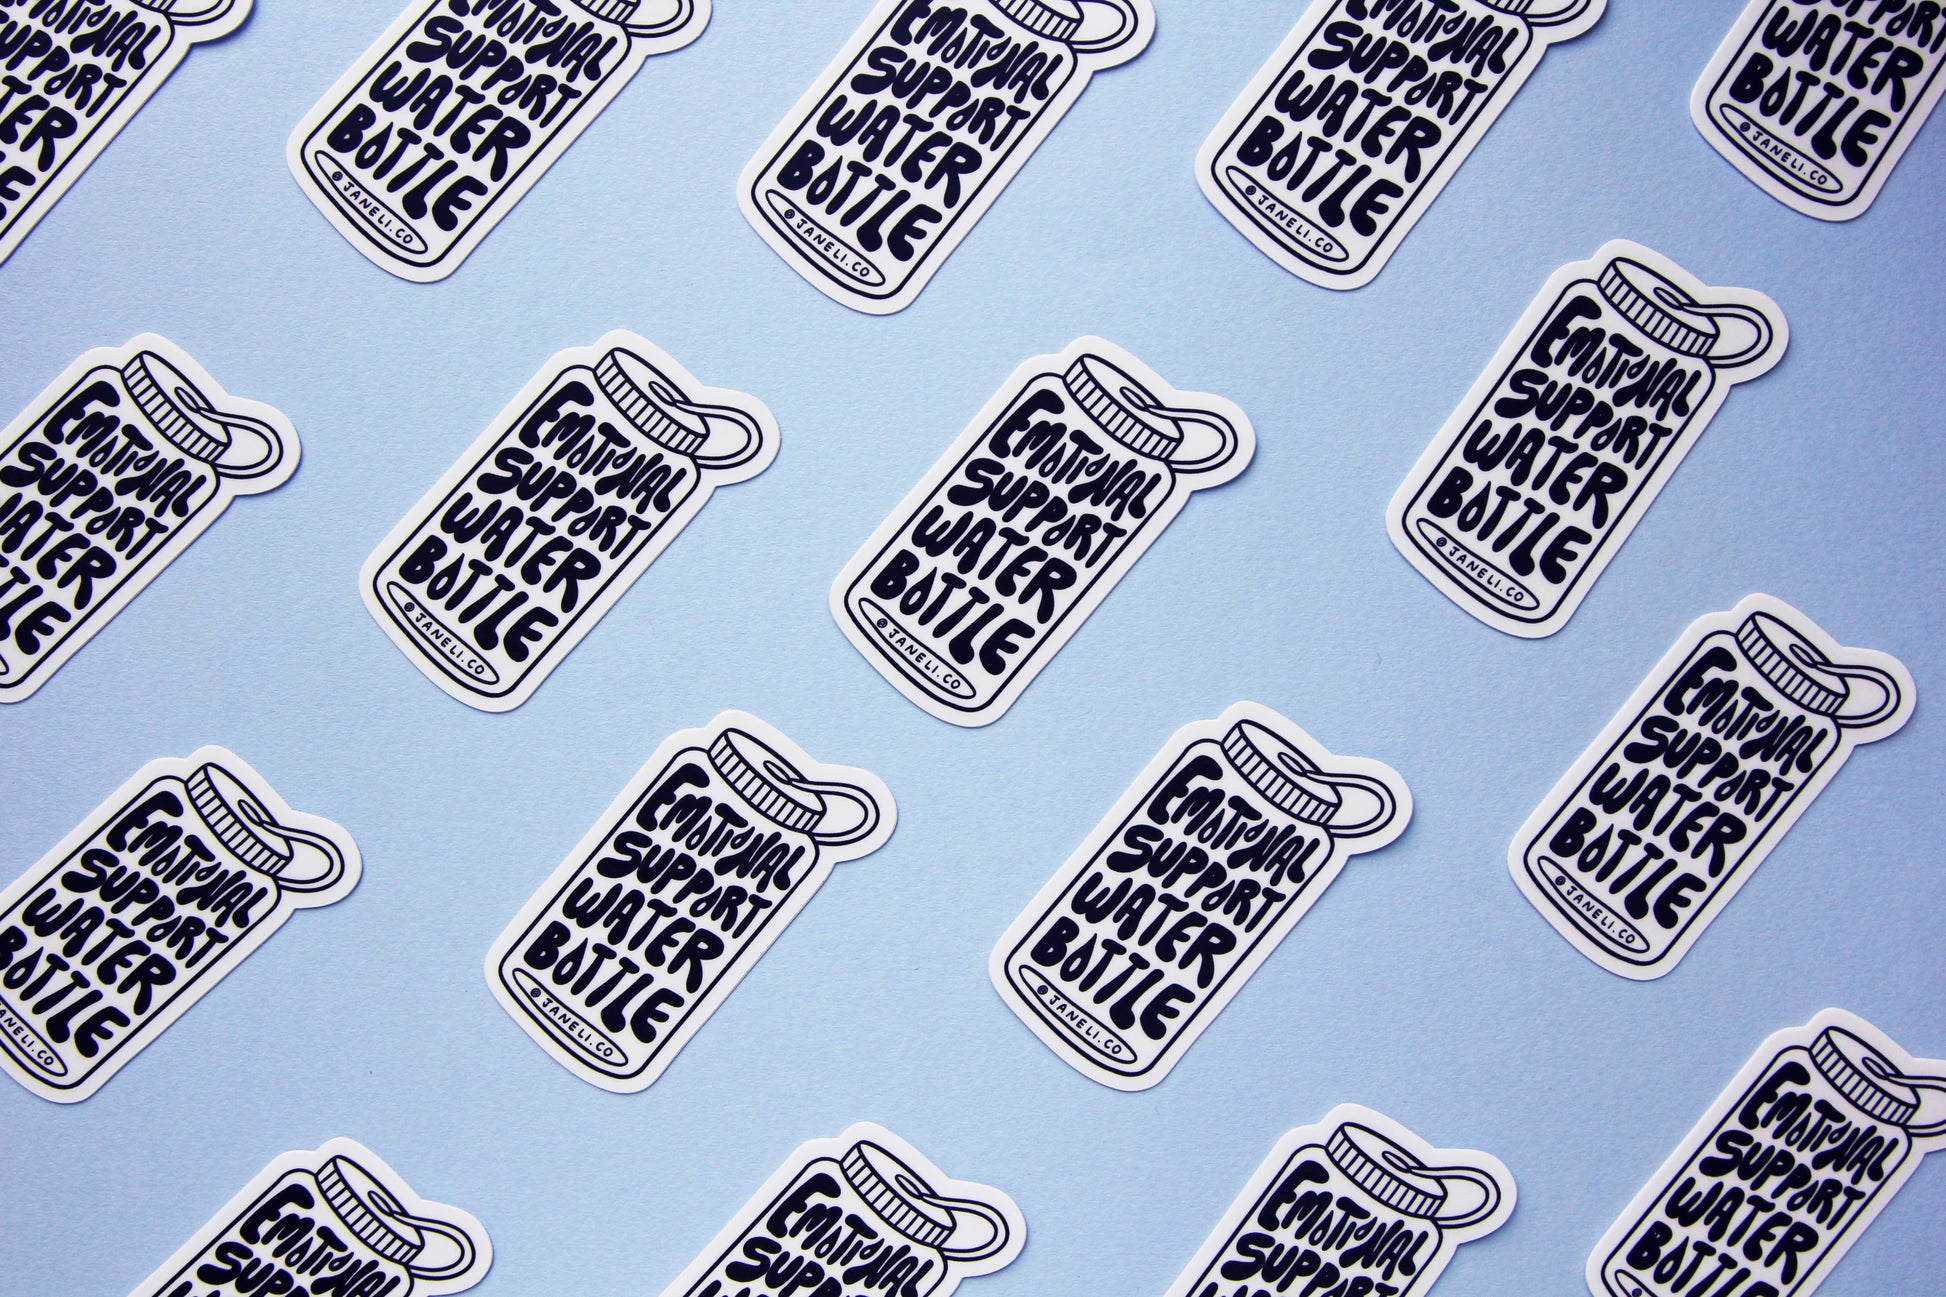 A grid of black and white JaneLi.Co stickers that say "Emotional Support Water Bottle" in the shape of a water bottle over a sky blue background.